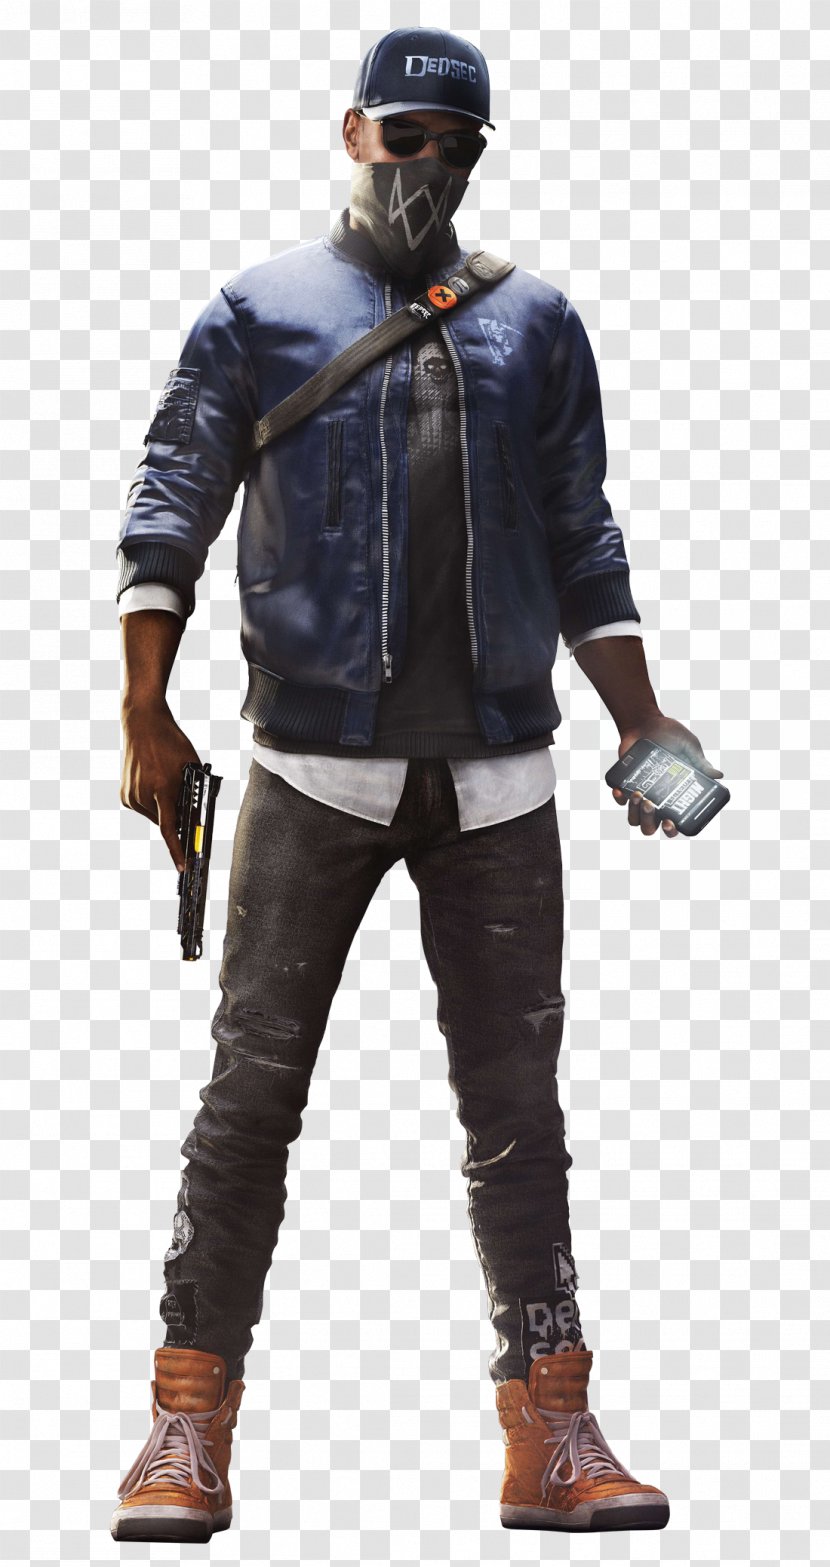 Watch Dogs 2 Hoodie Cosplay Costume - Aiden Pearce Transparent PNG